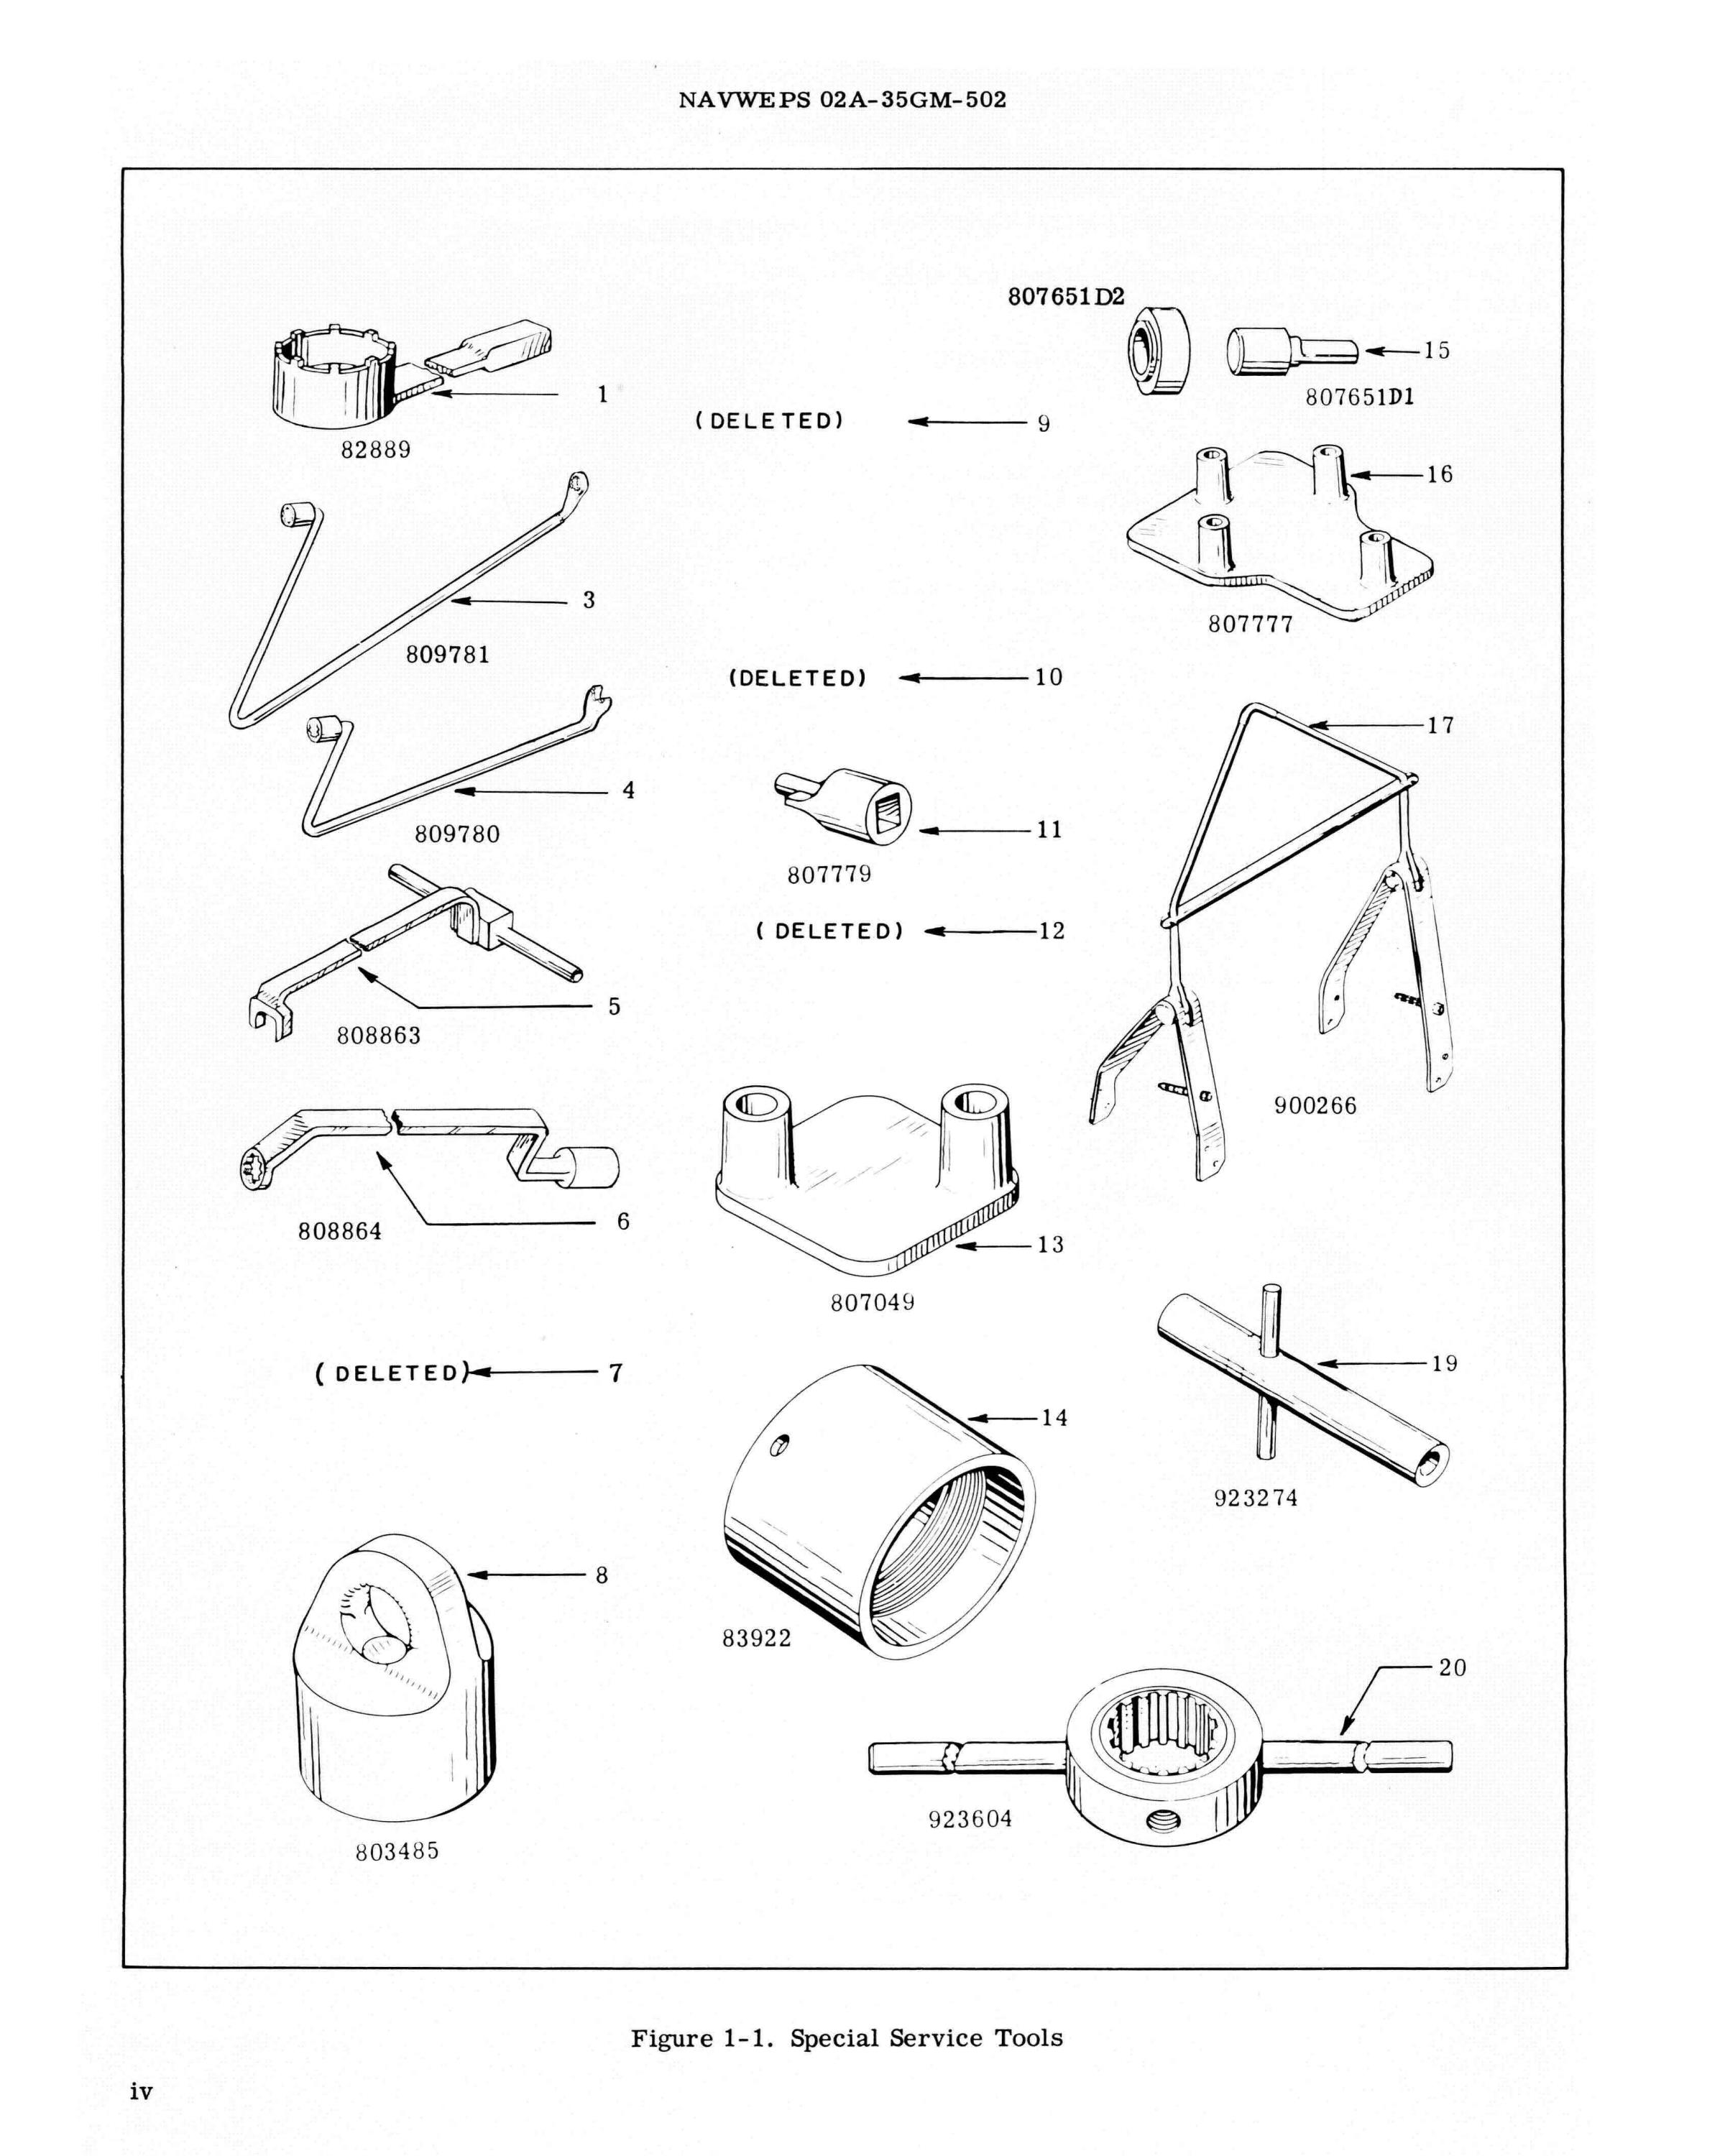 Sample page 4 from AirCorps Library document: Service Instructions for R-1820-84, -84A, and -84B Aircraft Engines